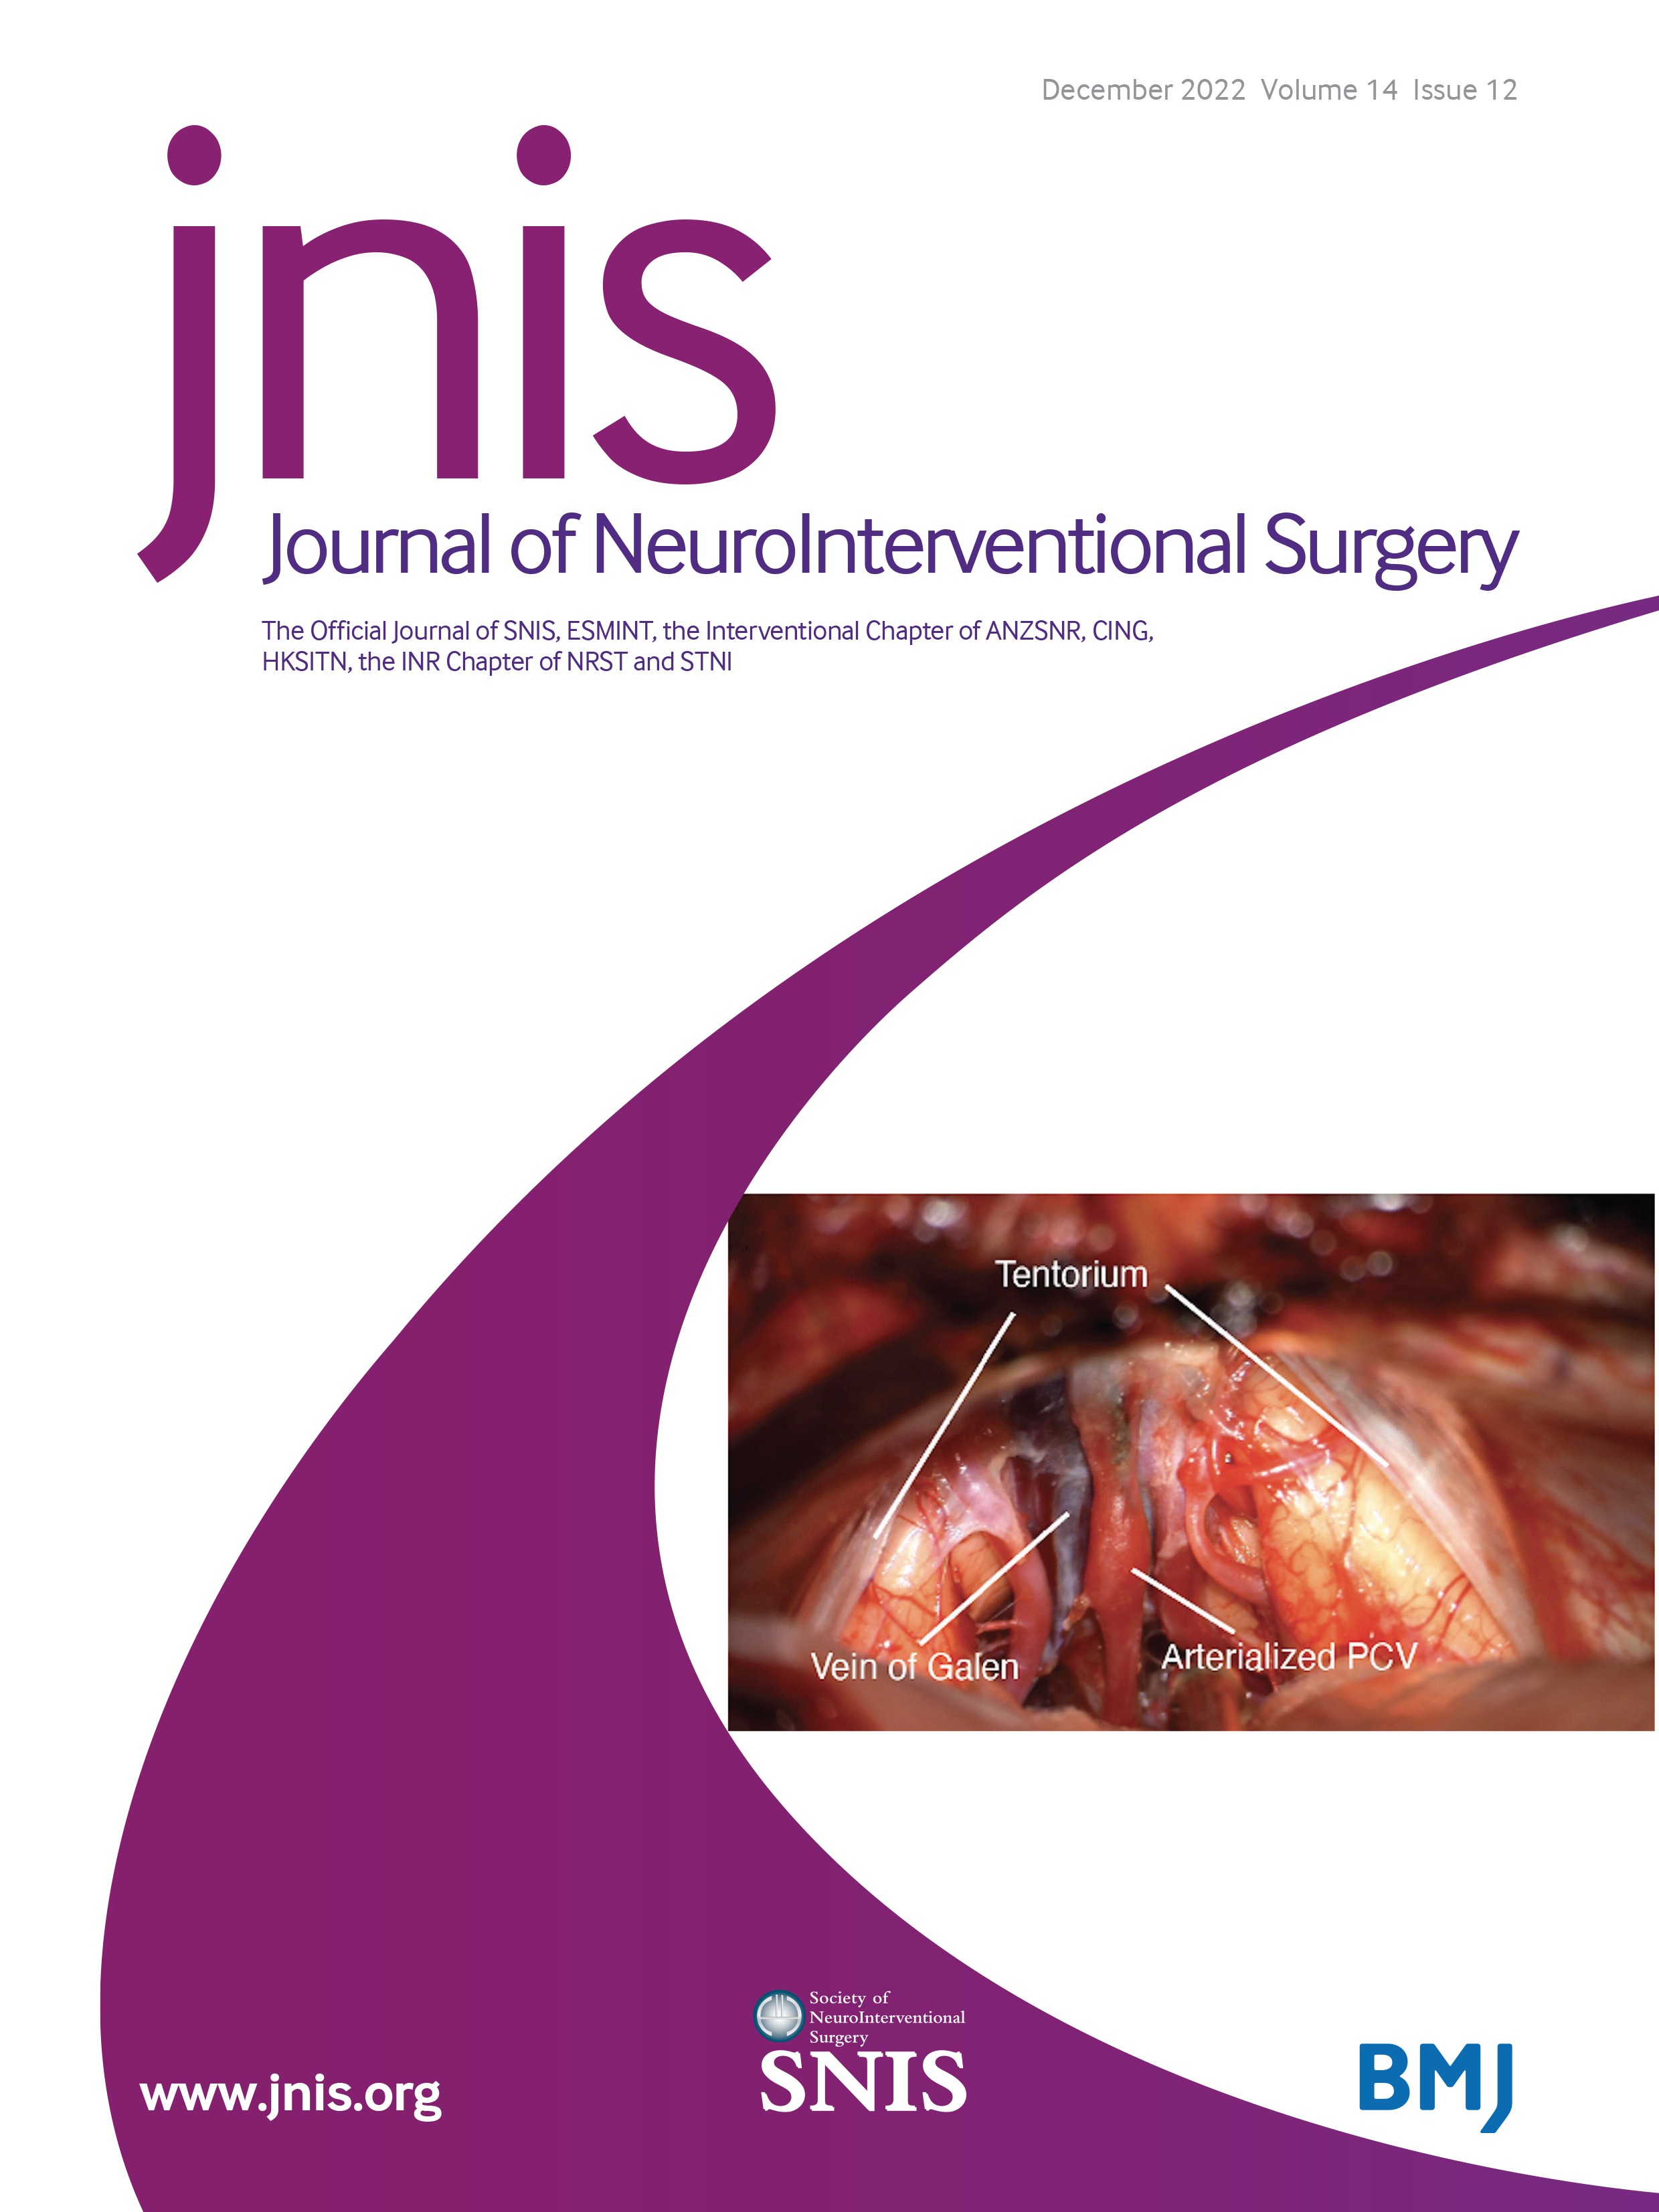 Robotic-assisted intracranial aneurysm treatment: 1 year follow-up imaging and clinical outcomes